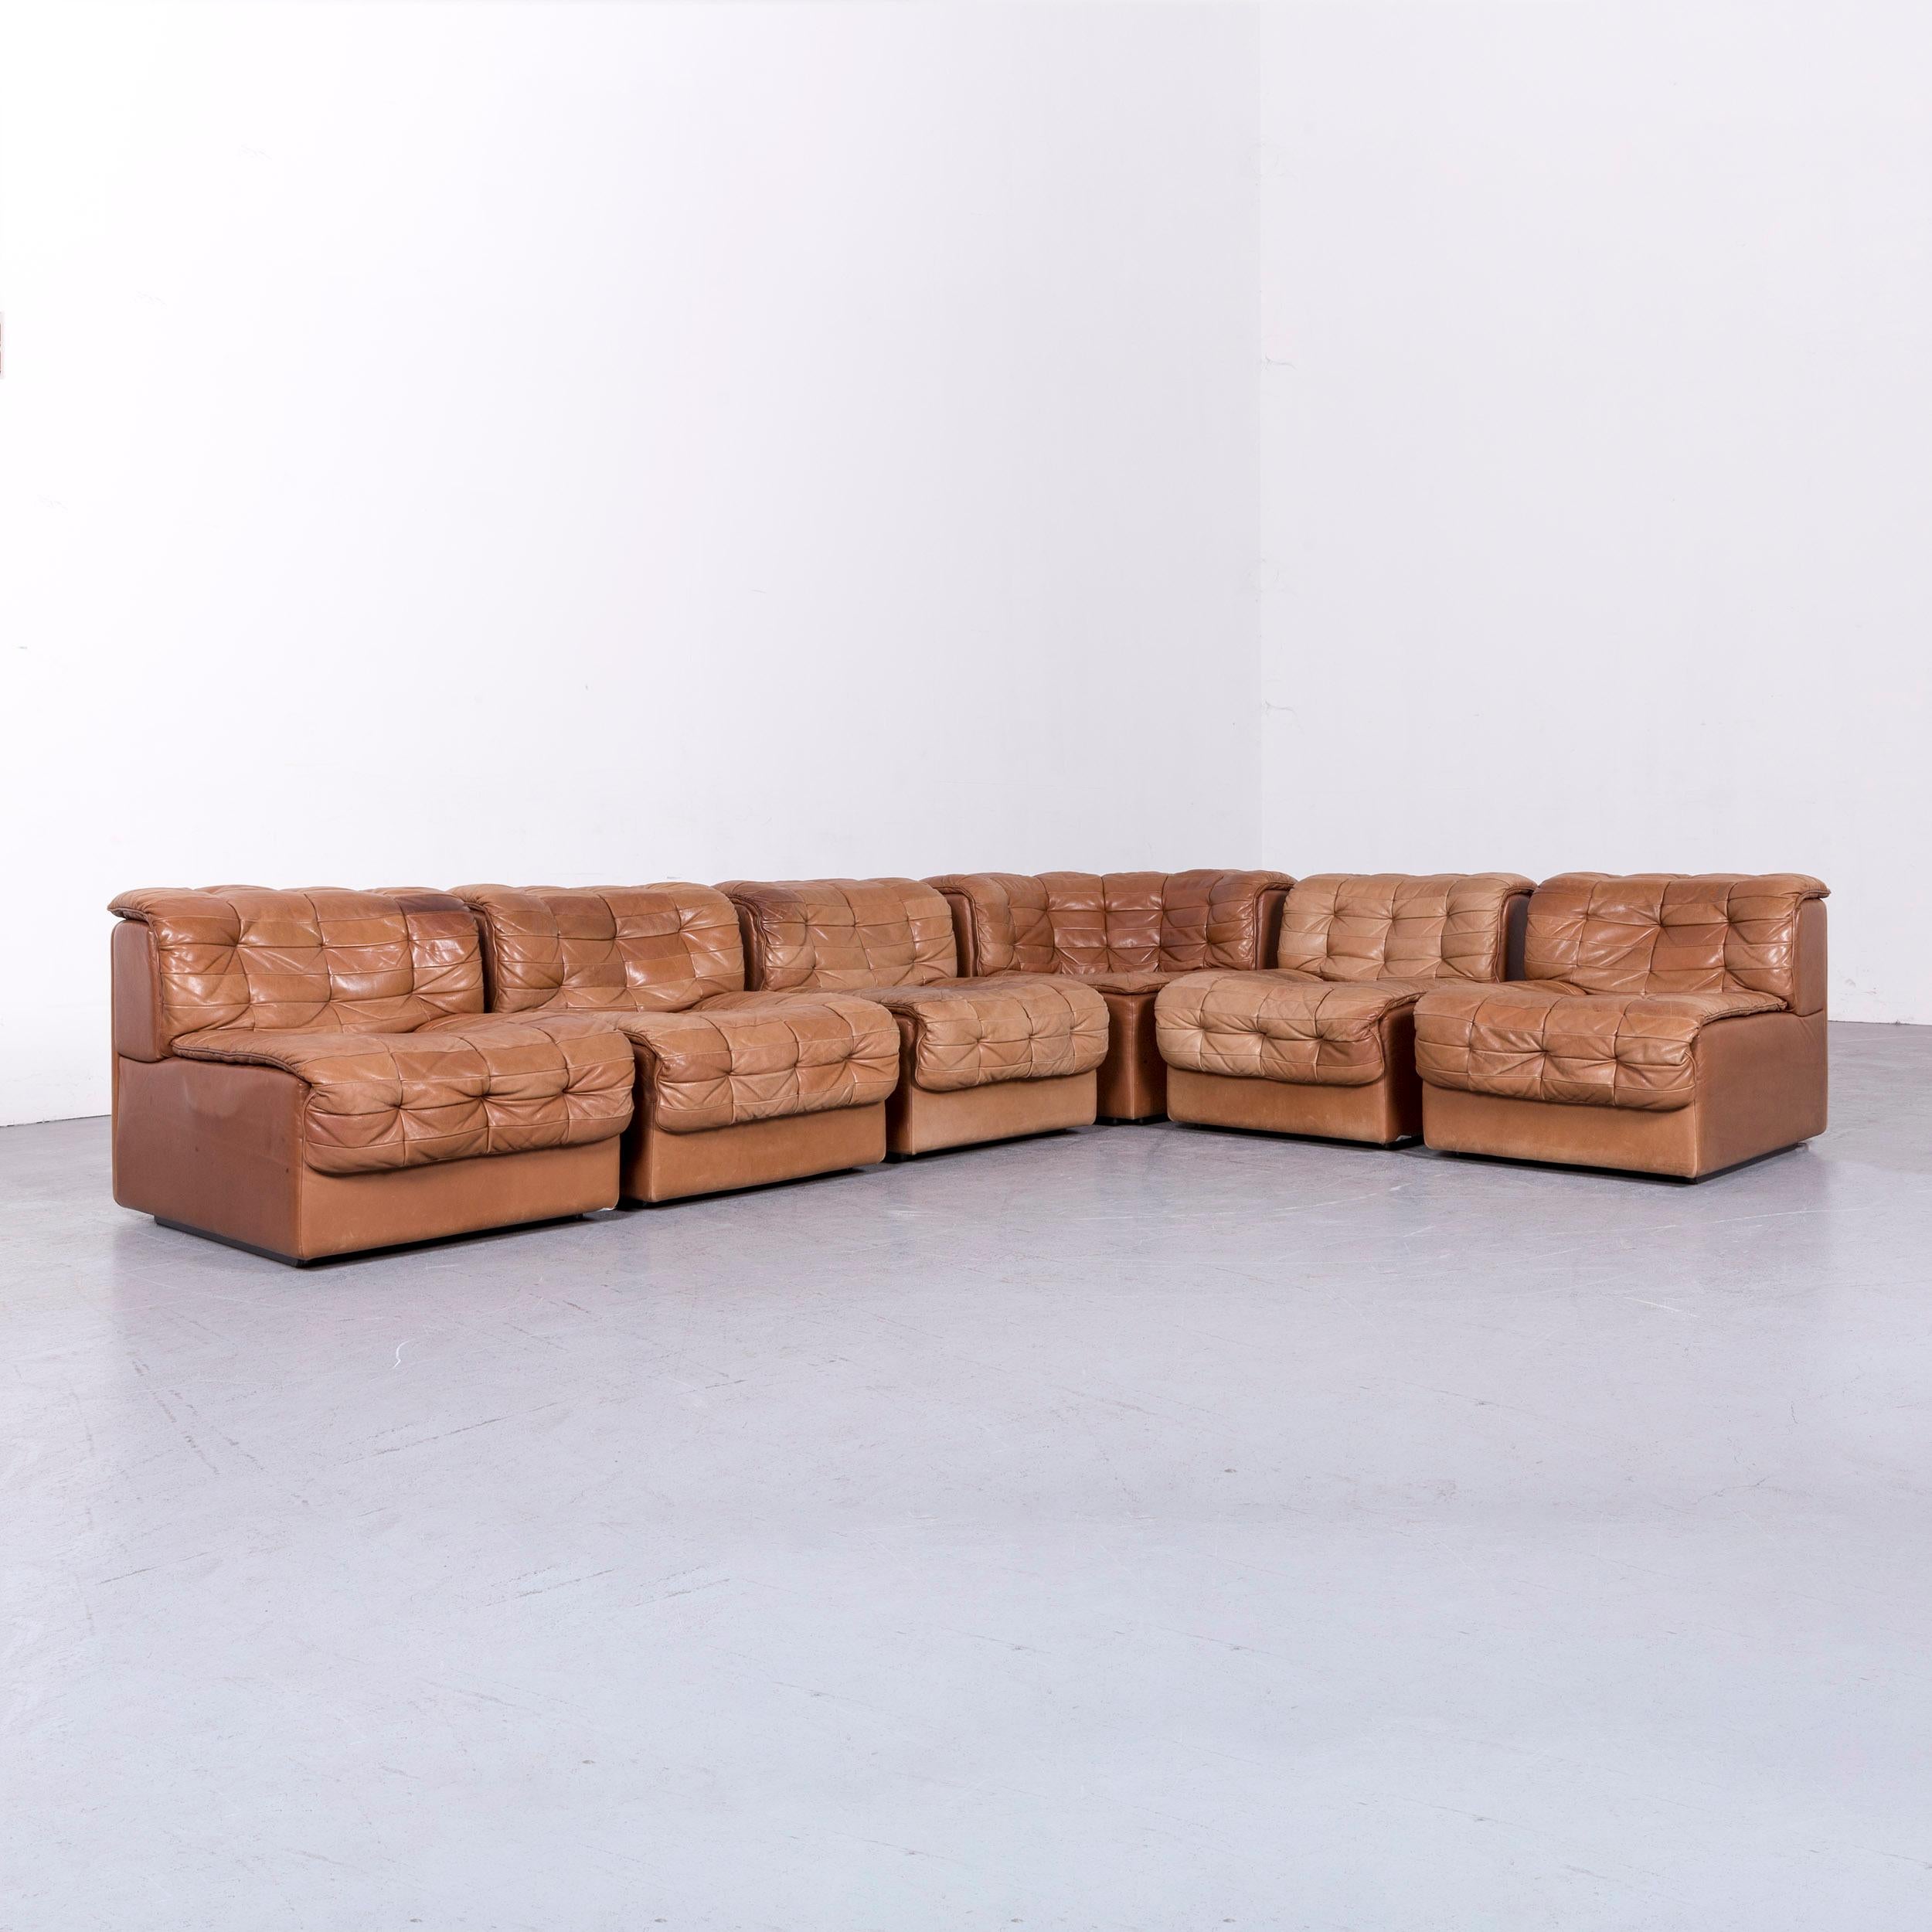 We bring to you a De Sede Ds 11 designer leather sofa brown corner couch.





        